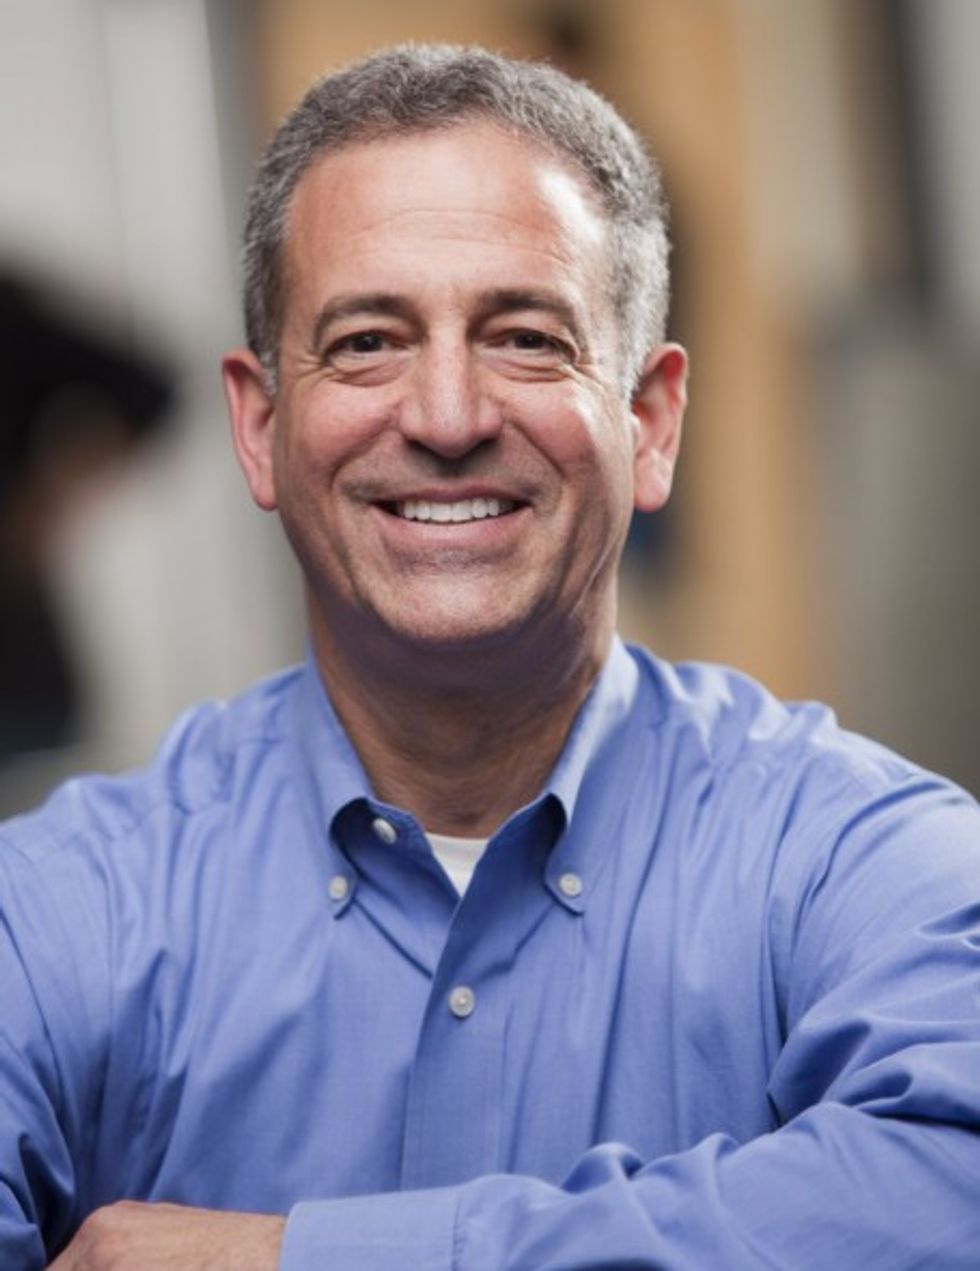 Wisconsin's Russ Feingold Will Buy Old Senate Seat With Hollywood Jew Moneys